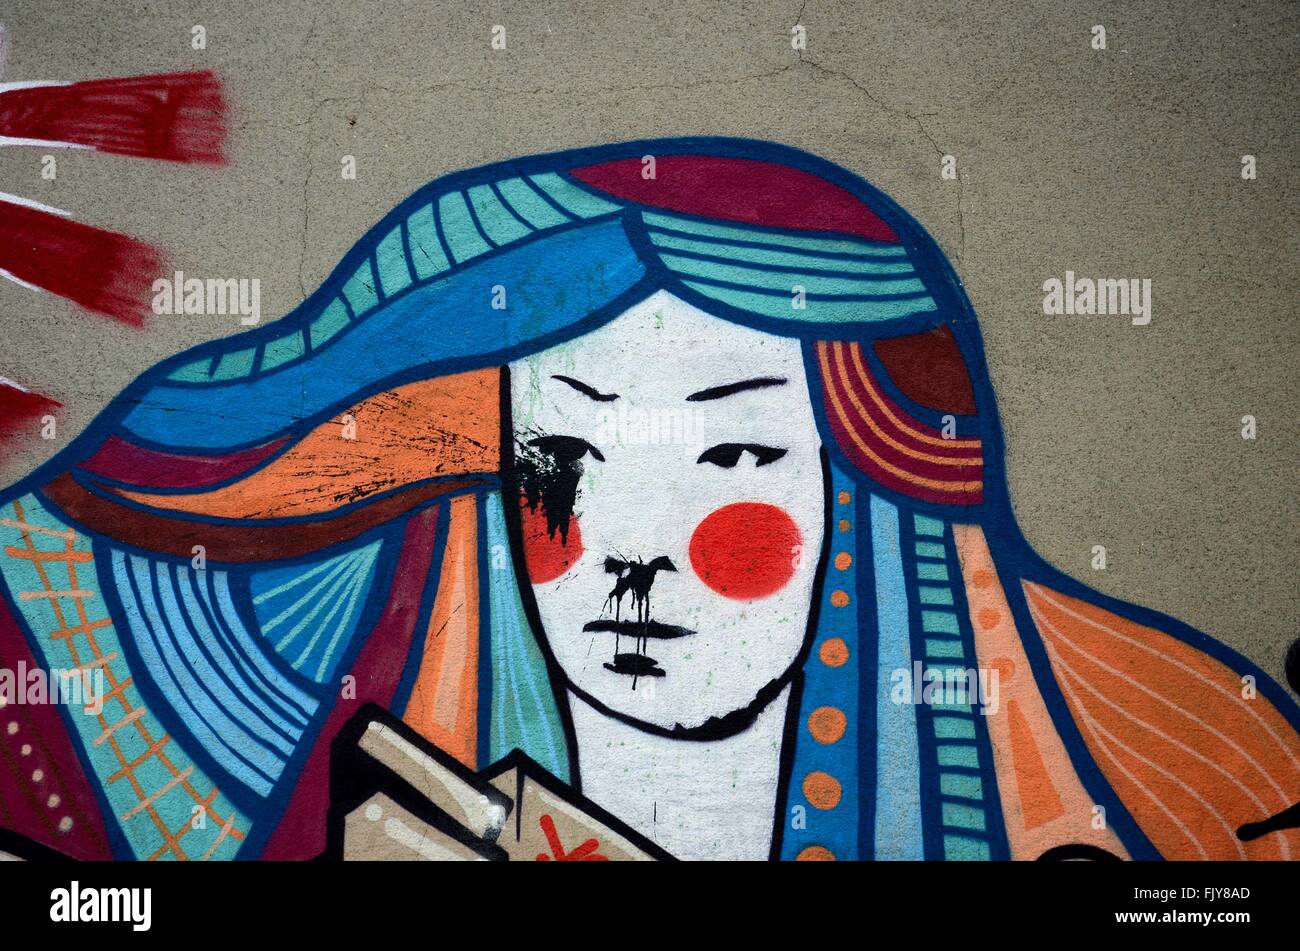 Woman japanese images and - Alamy graffiti photography stock hi-res